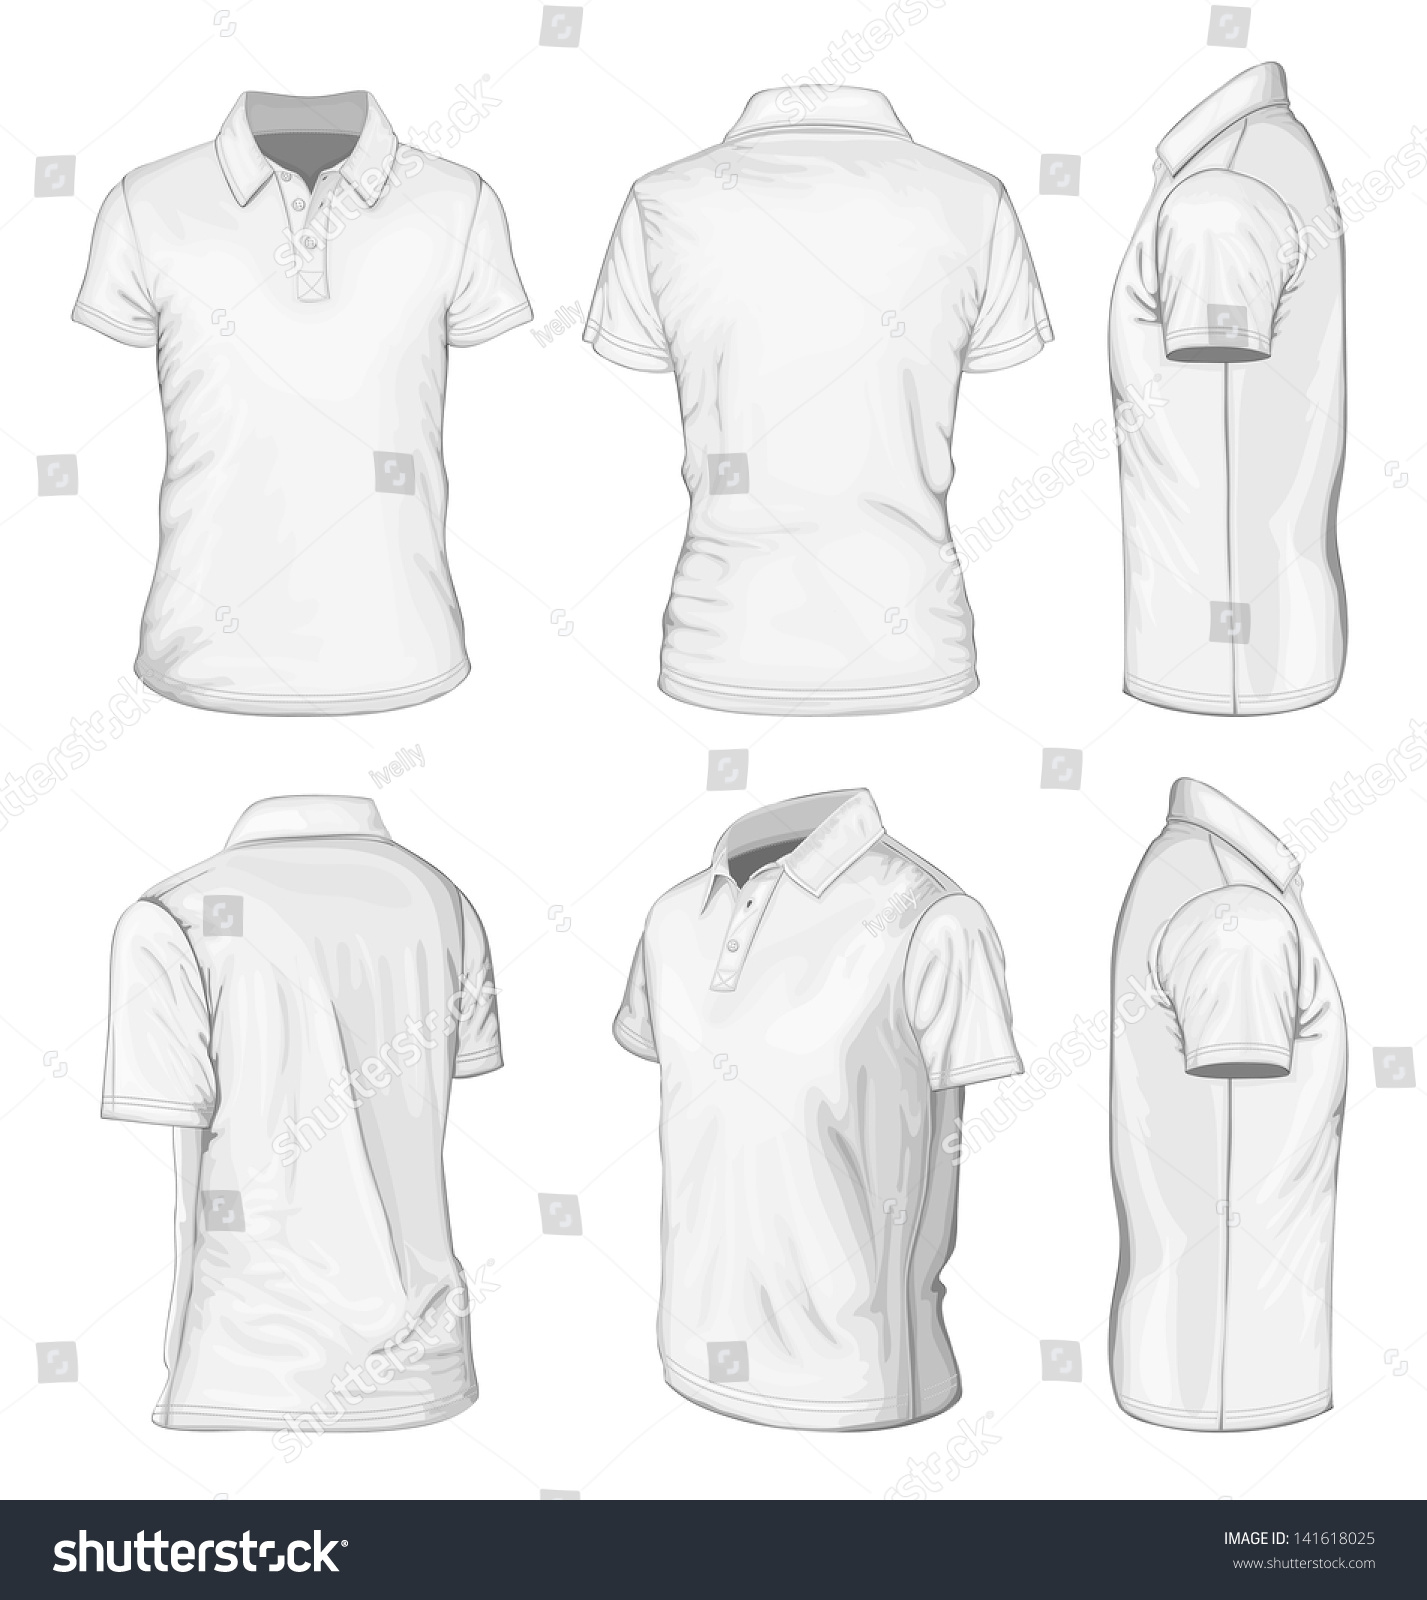 Download All Views Mens White Short Sleeve Stock Vector 141618025 ...